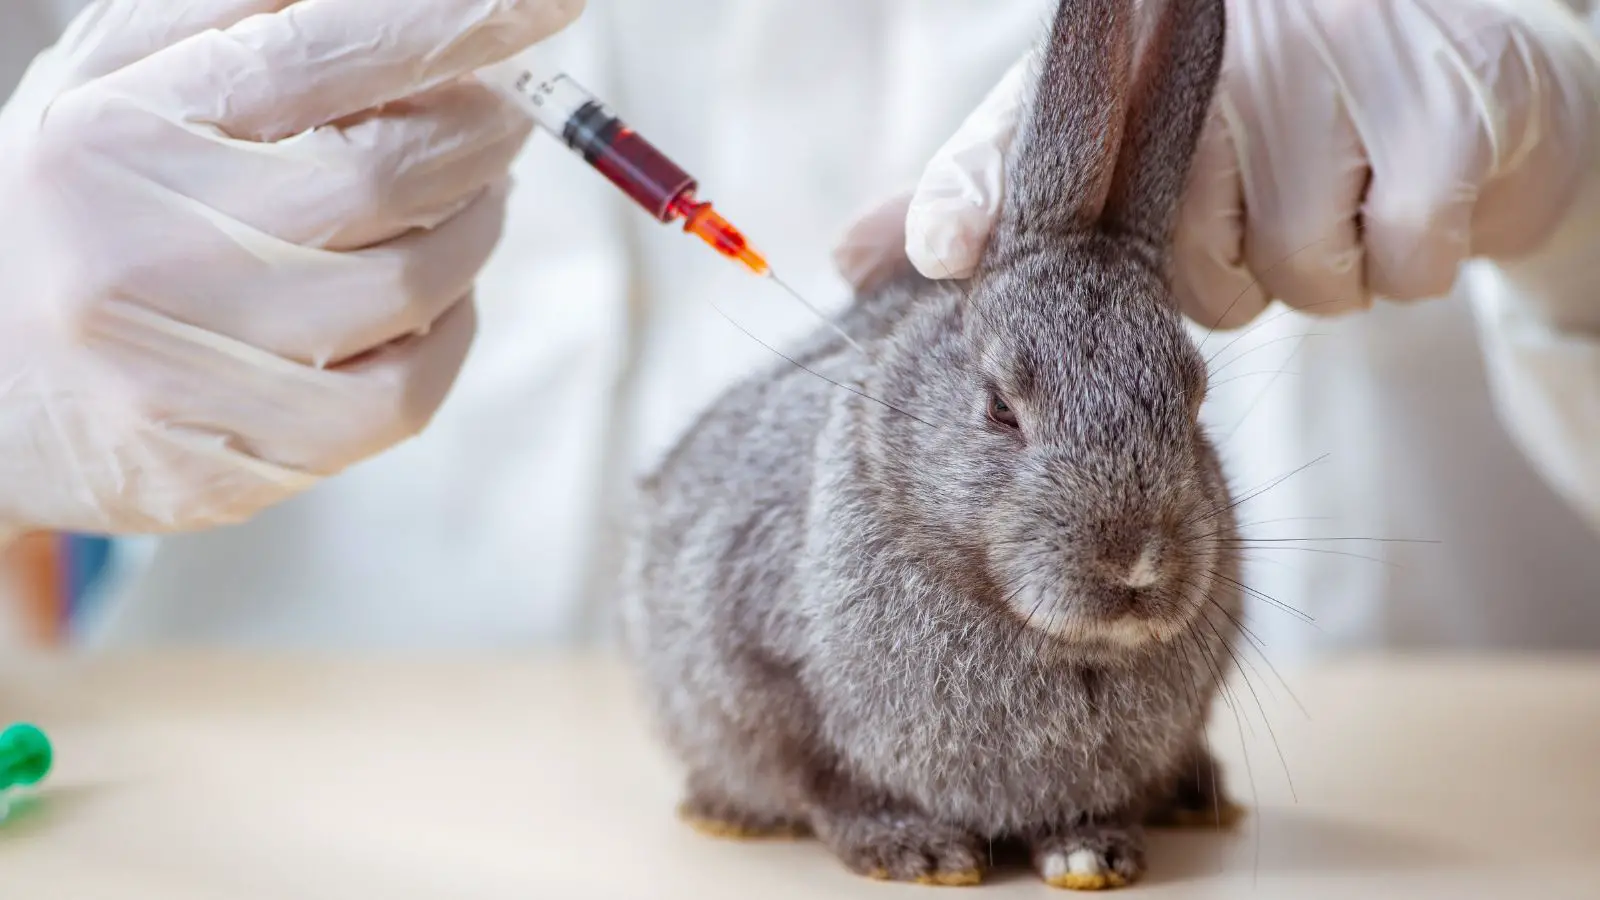 Rabbit getting his vaccine shot - abouteverythingpets.com